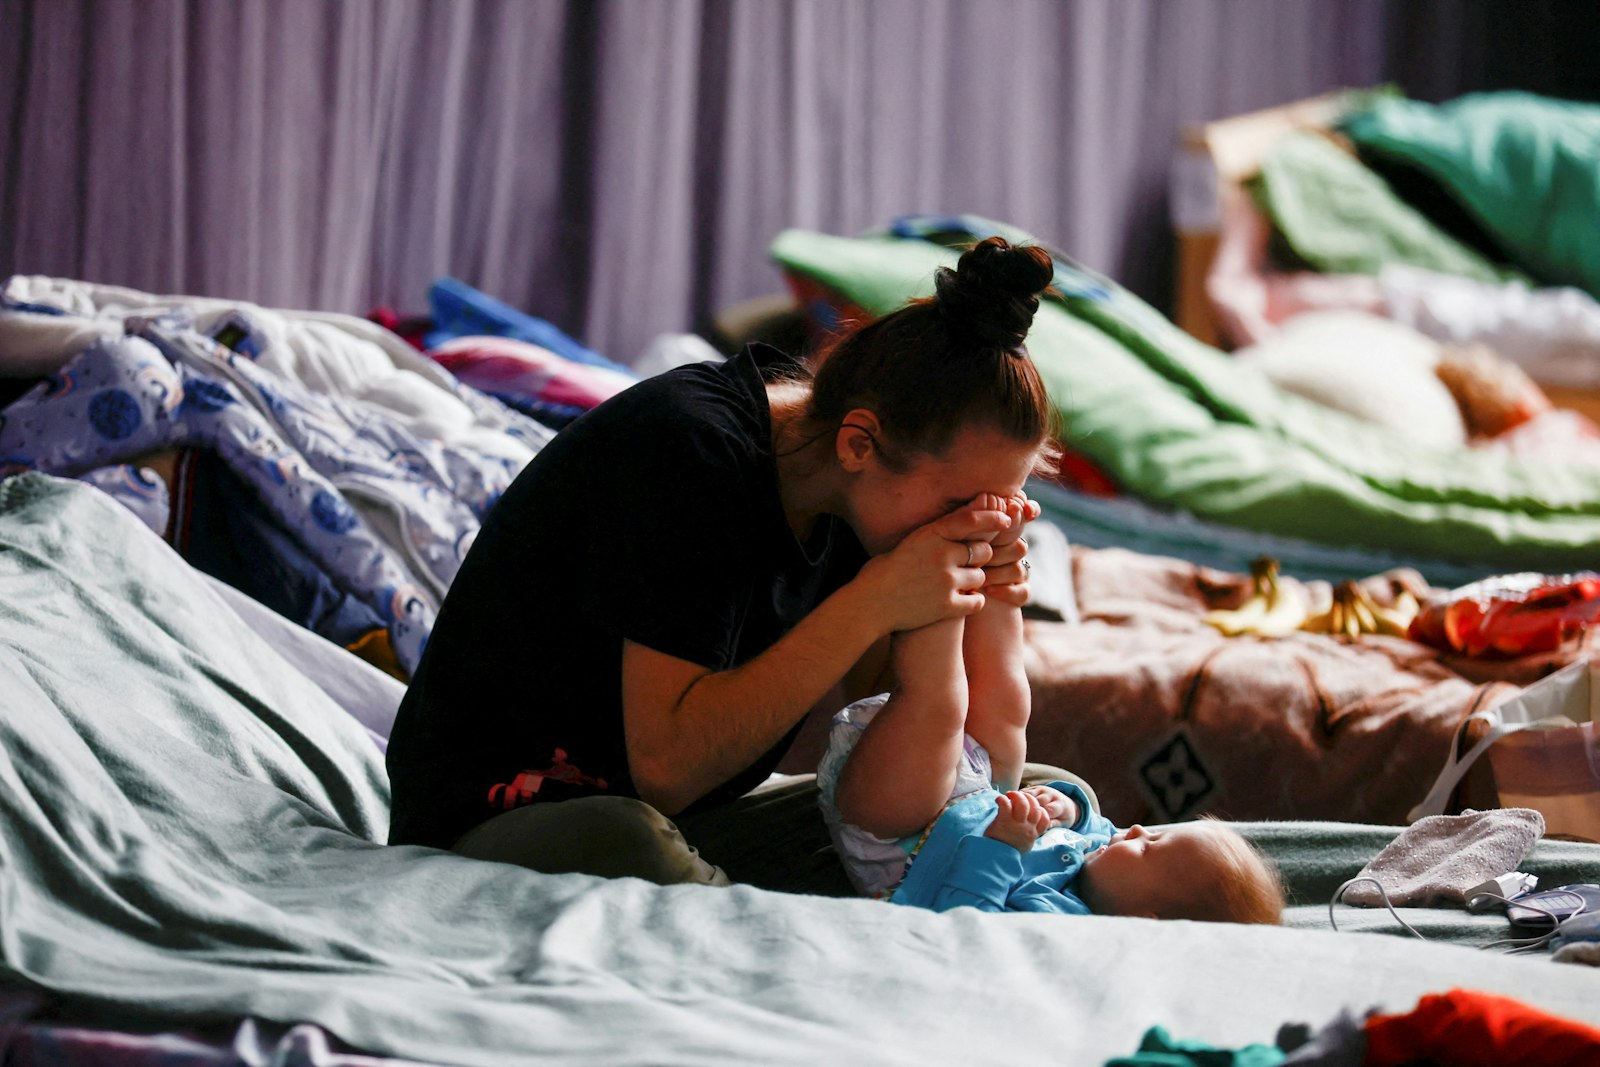 A woman in Przemysl, Poland, plays with her child March 9, 2022, in a sports hall of a high school transformed into temporary accommodations for people fleeing the Russian invasion of Ukraine. (CNS photo/Yara Nardi, Reuters)